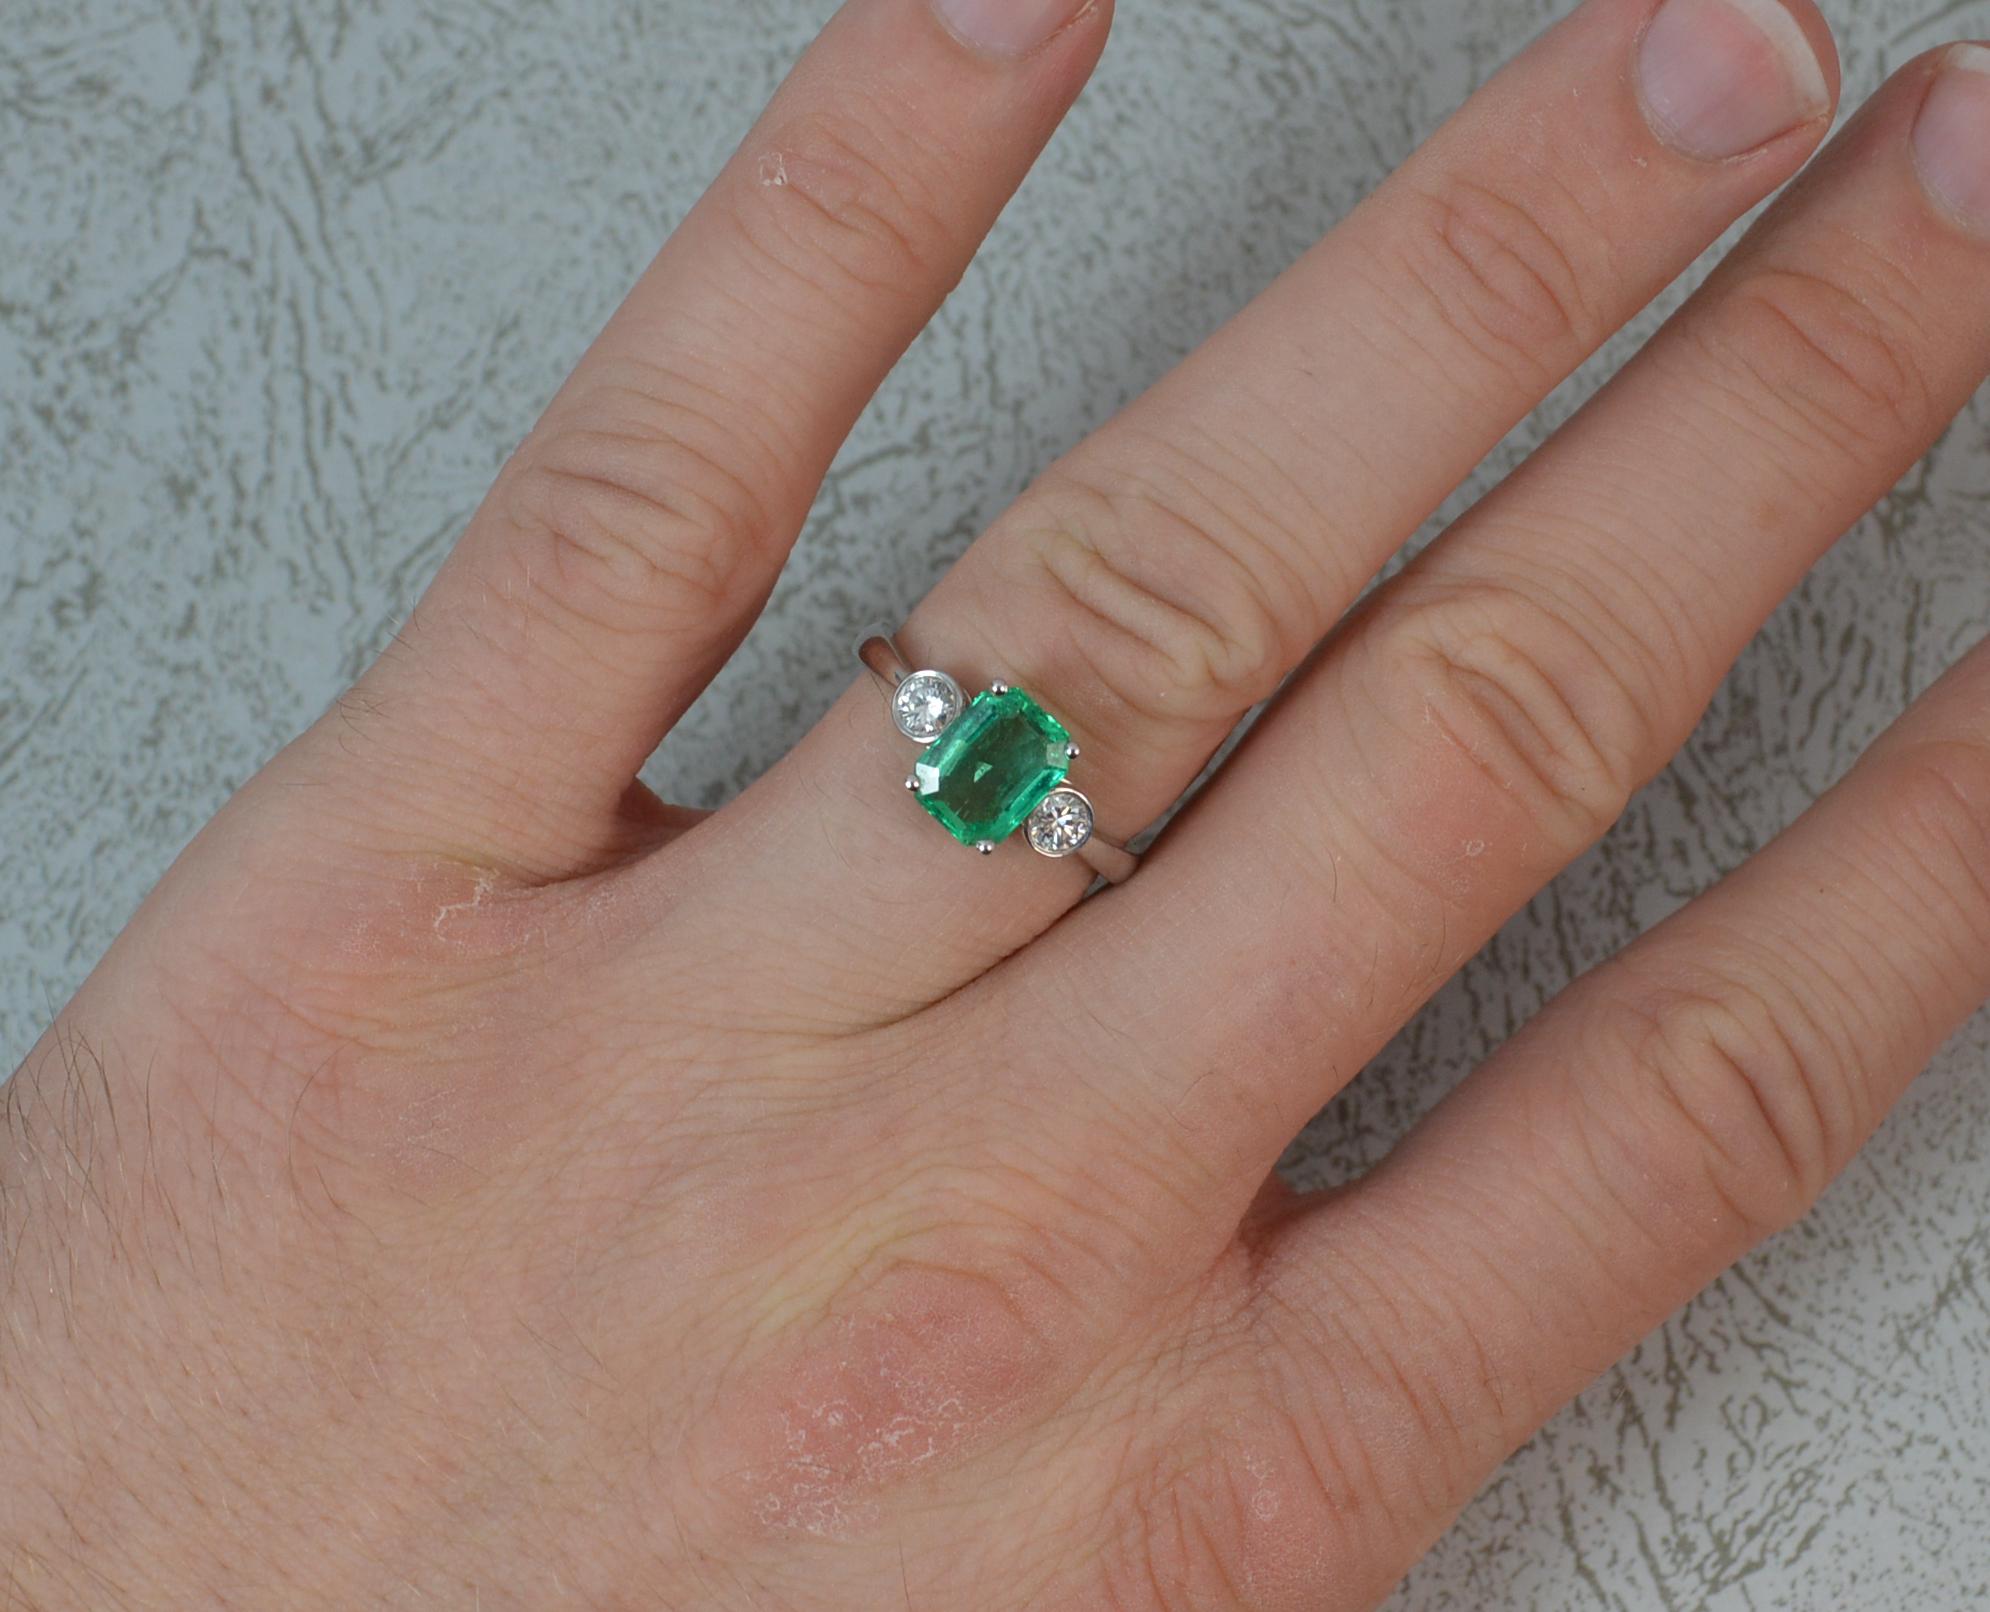 A superb Emerald and Diamond three stone ring.
Modelled in 18 carat white gold throughout.
Designed with a emerald cut emerald to centre in four claw setting. Believed to be Colombian origin. 6.3mm x 8.2mm approx. To each side is a 0.2 carat round